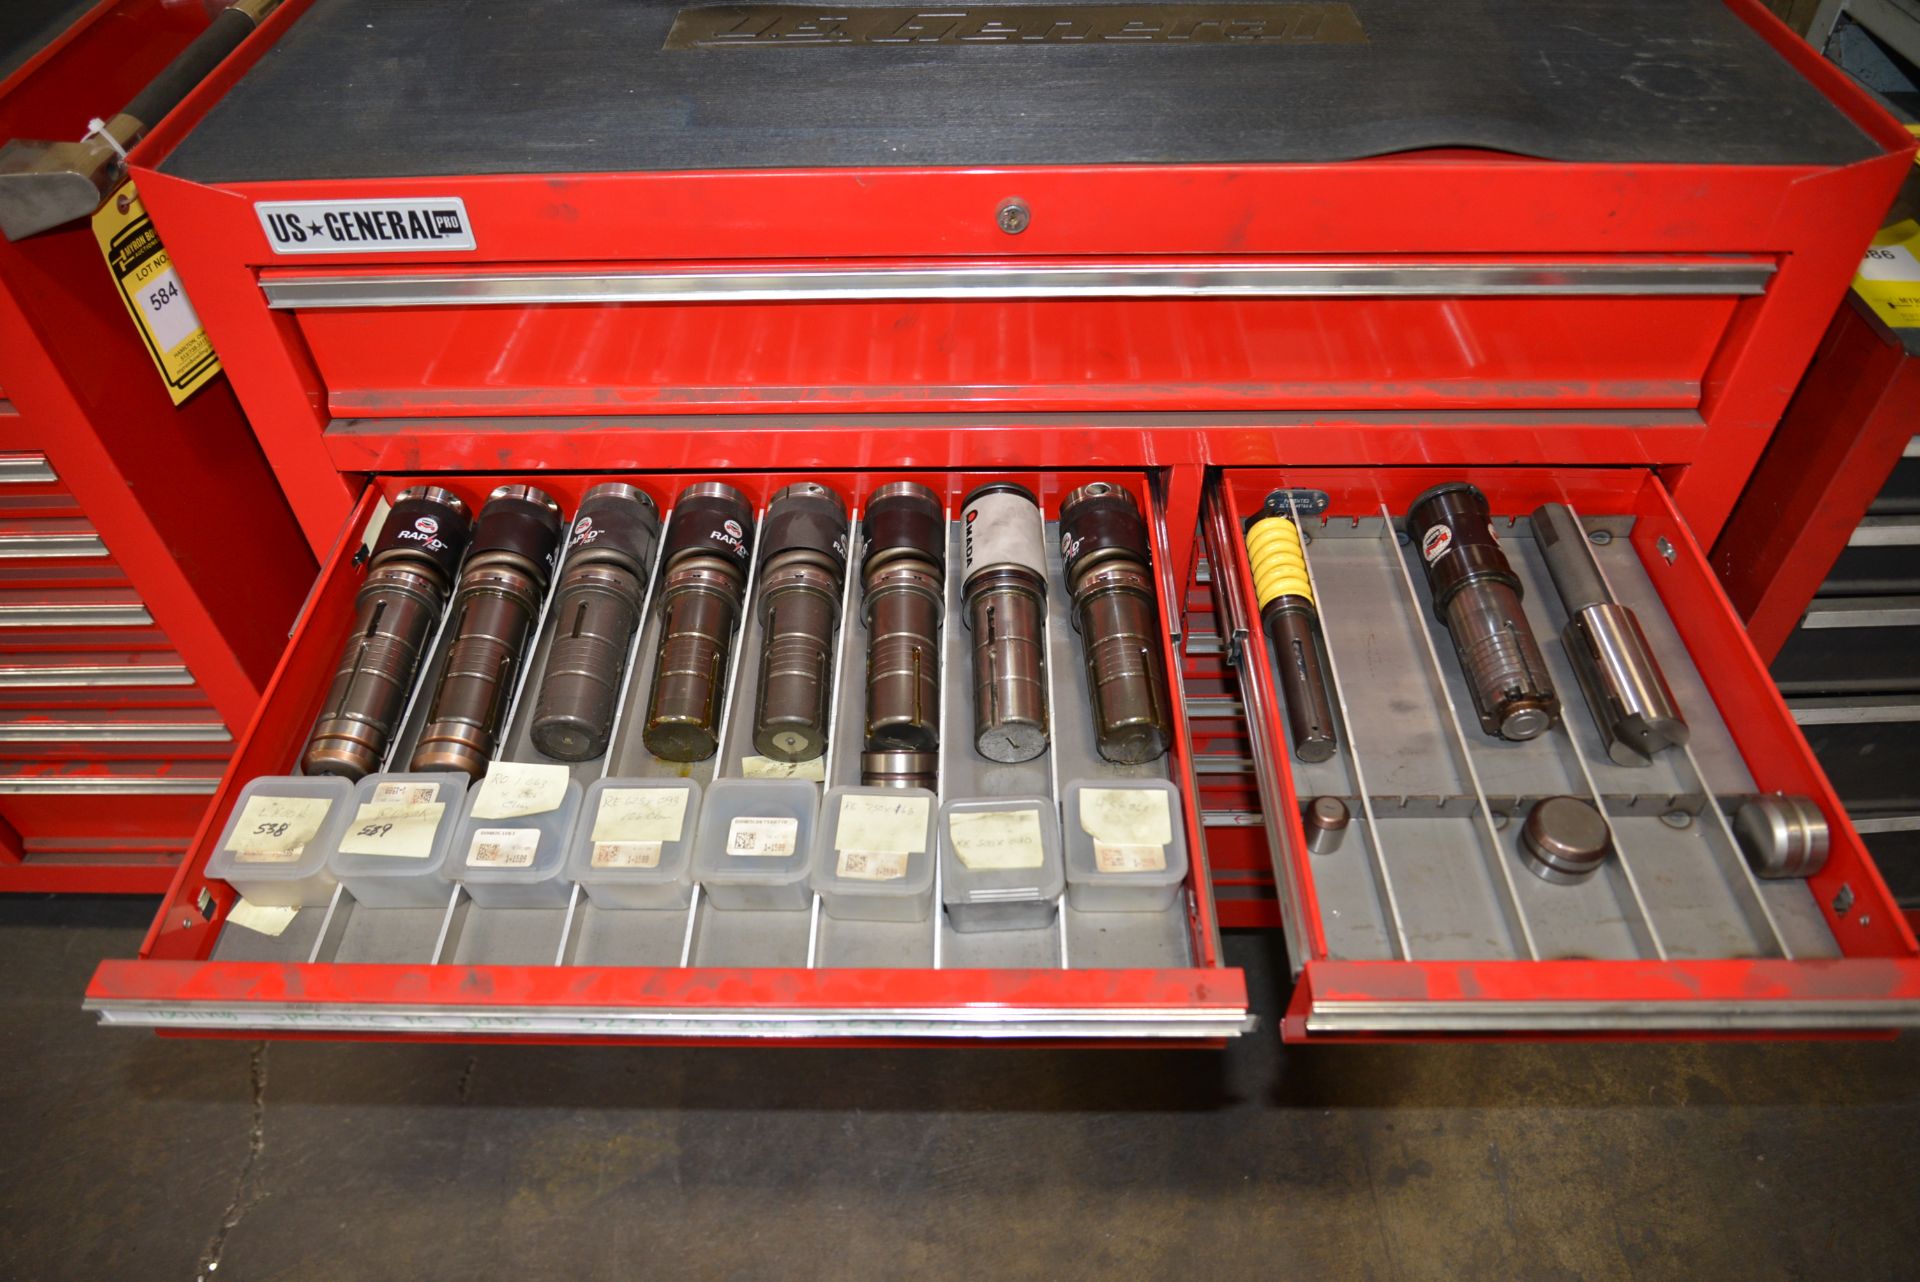 US GENERAL TOOL CHEST FULL OF AMADA TOOLING - Image 3 of 8